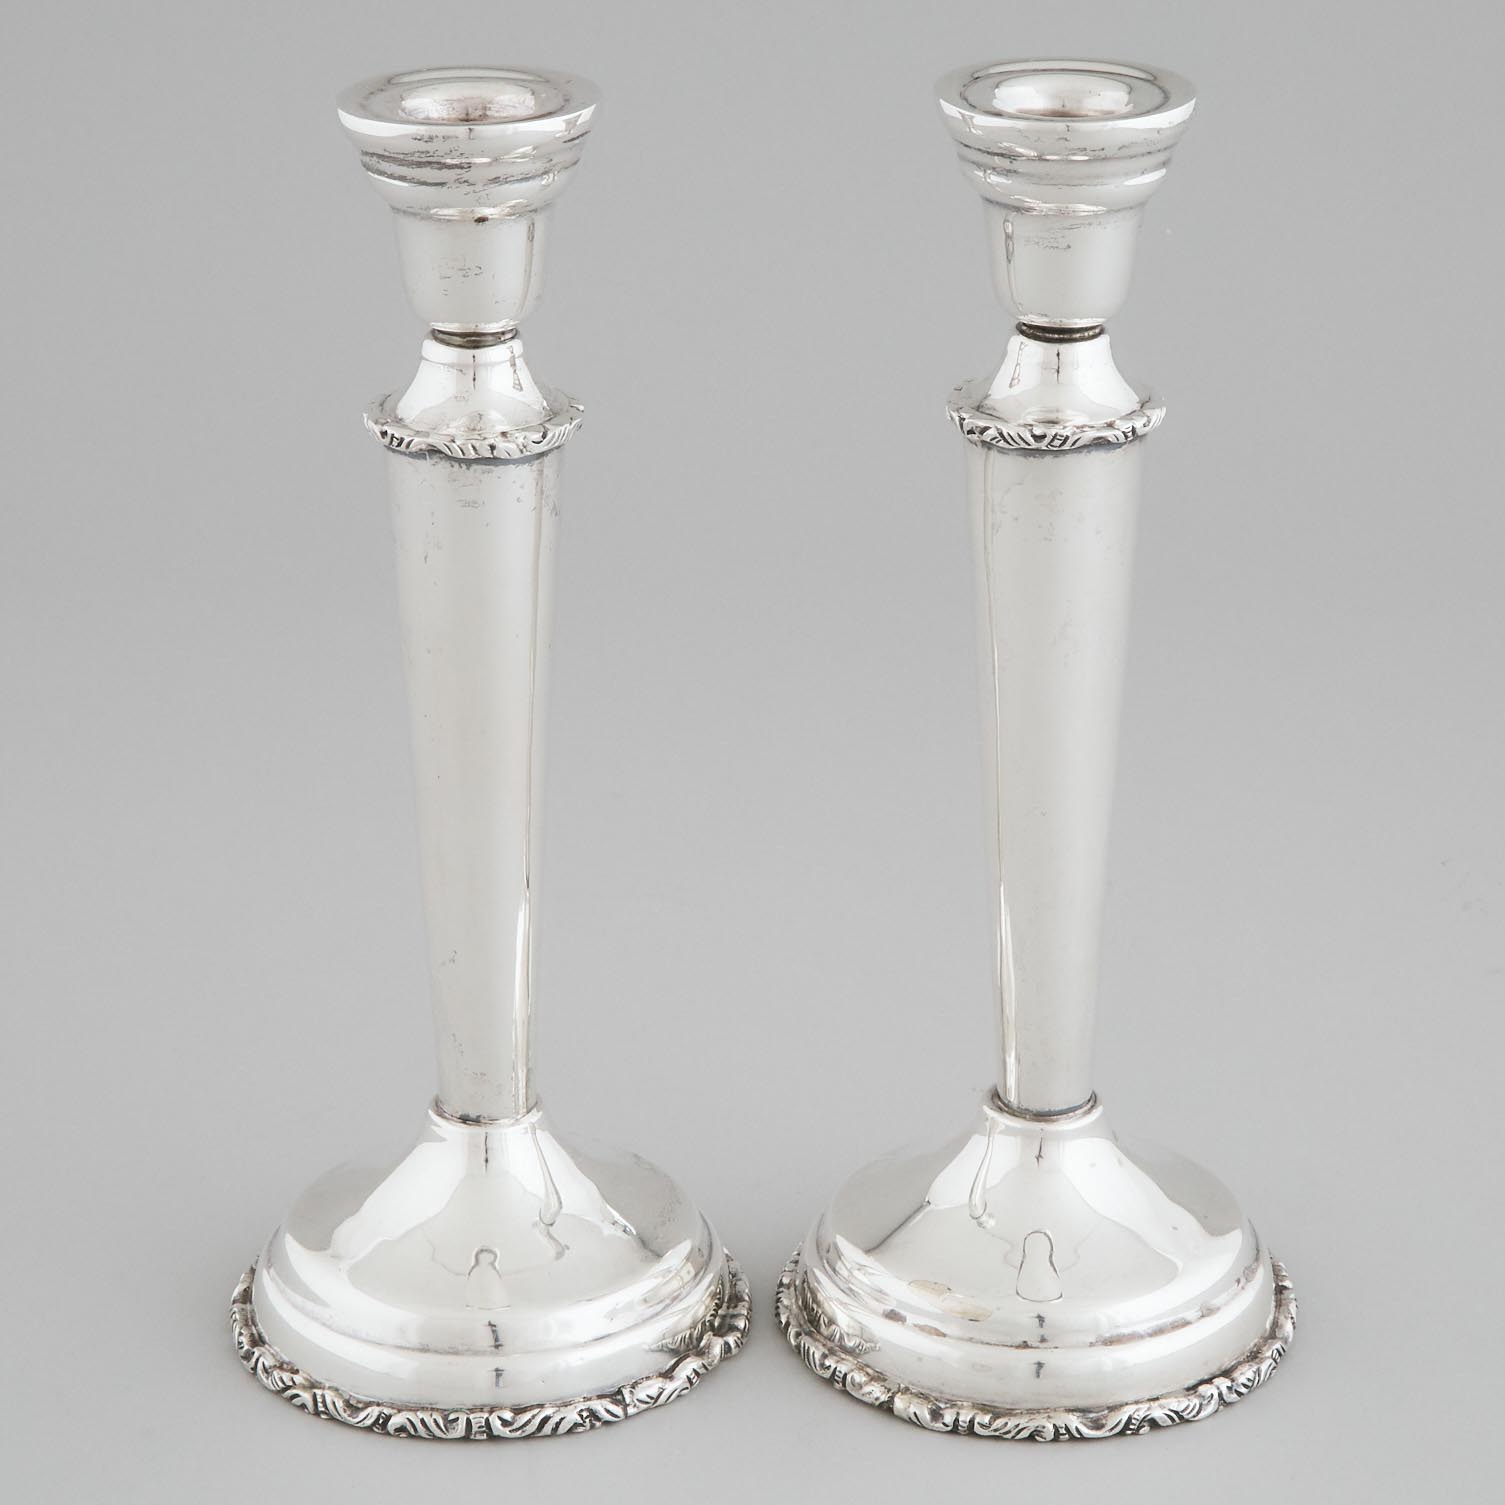 Pair of Mexican Silver Table Candlesticks, 20th century